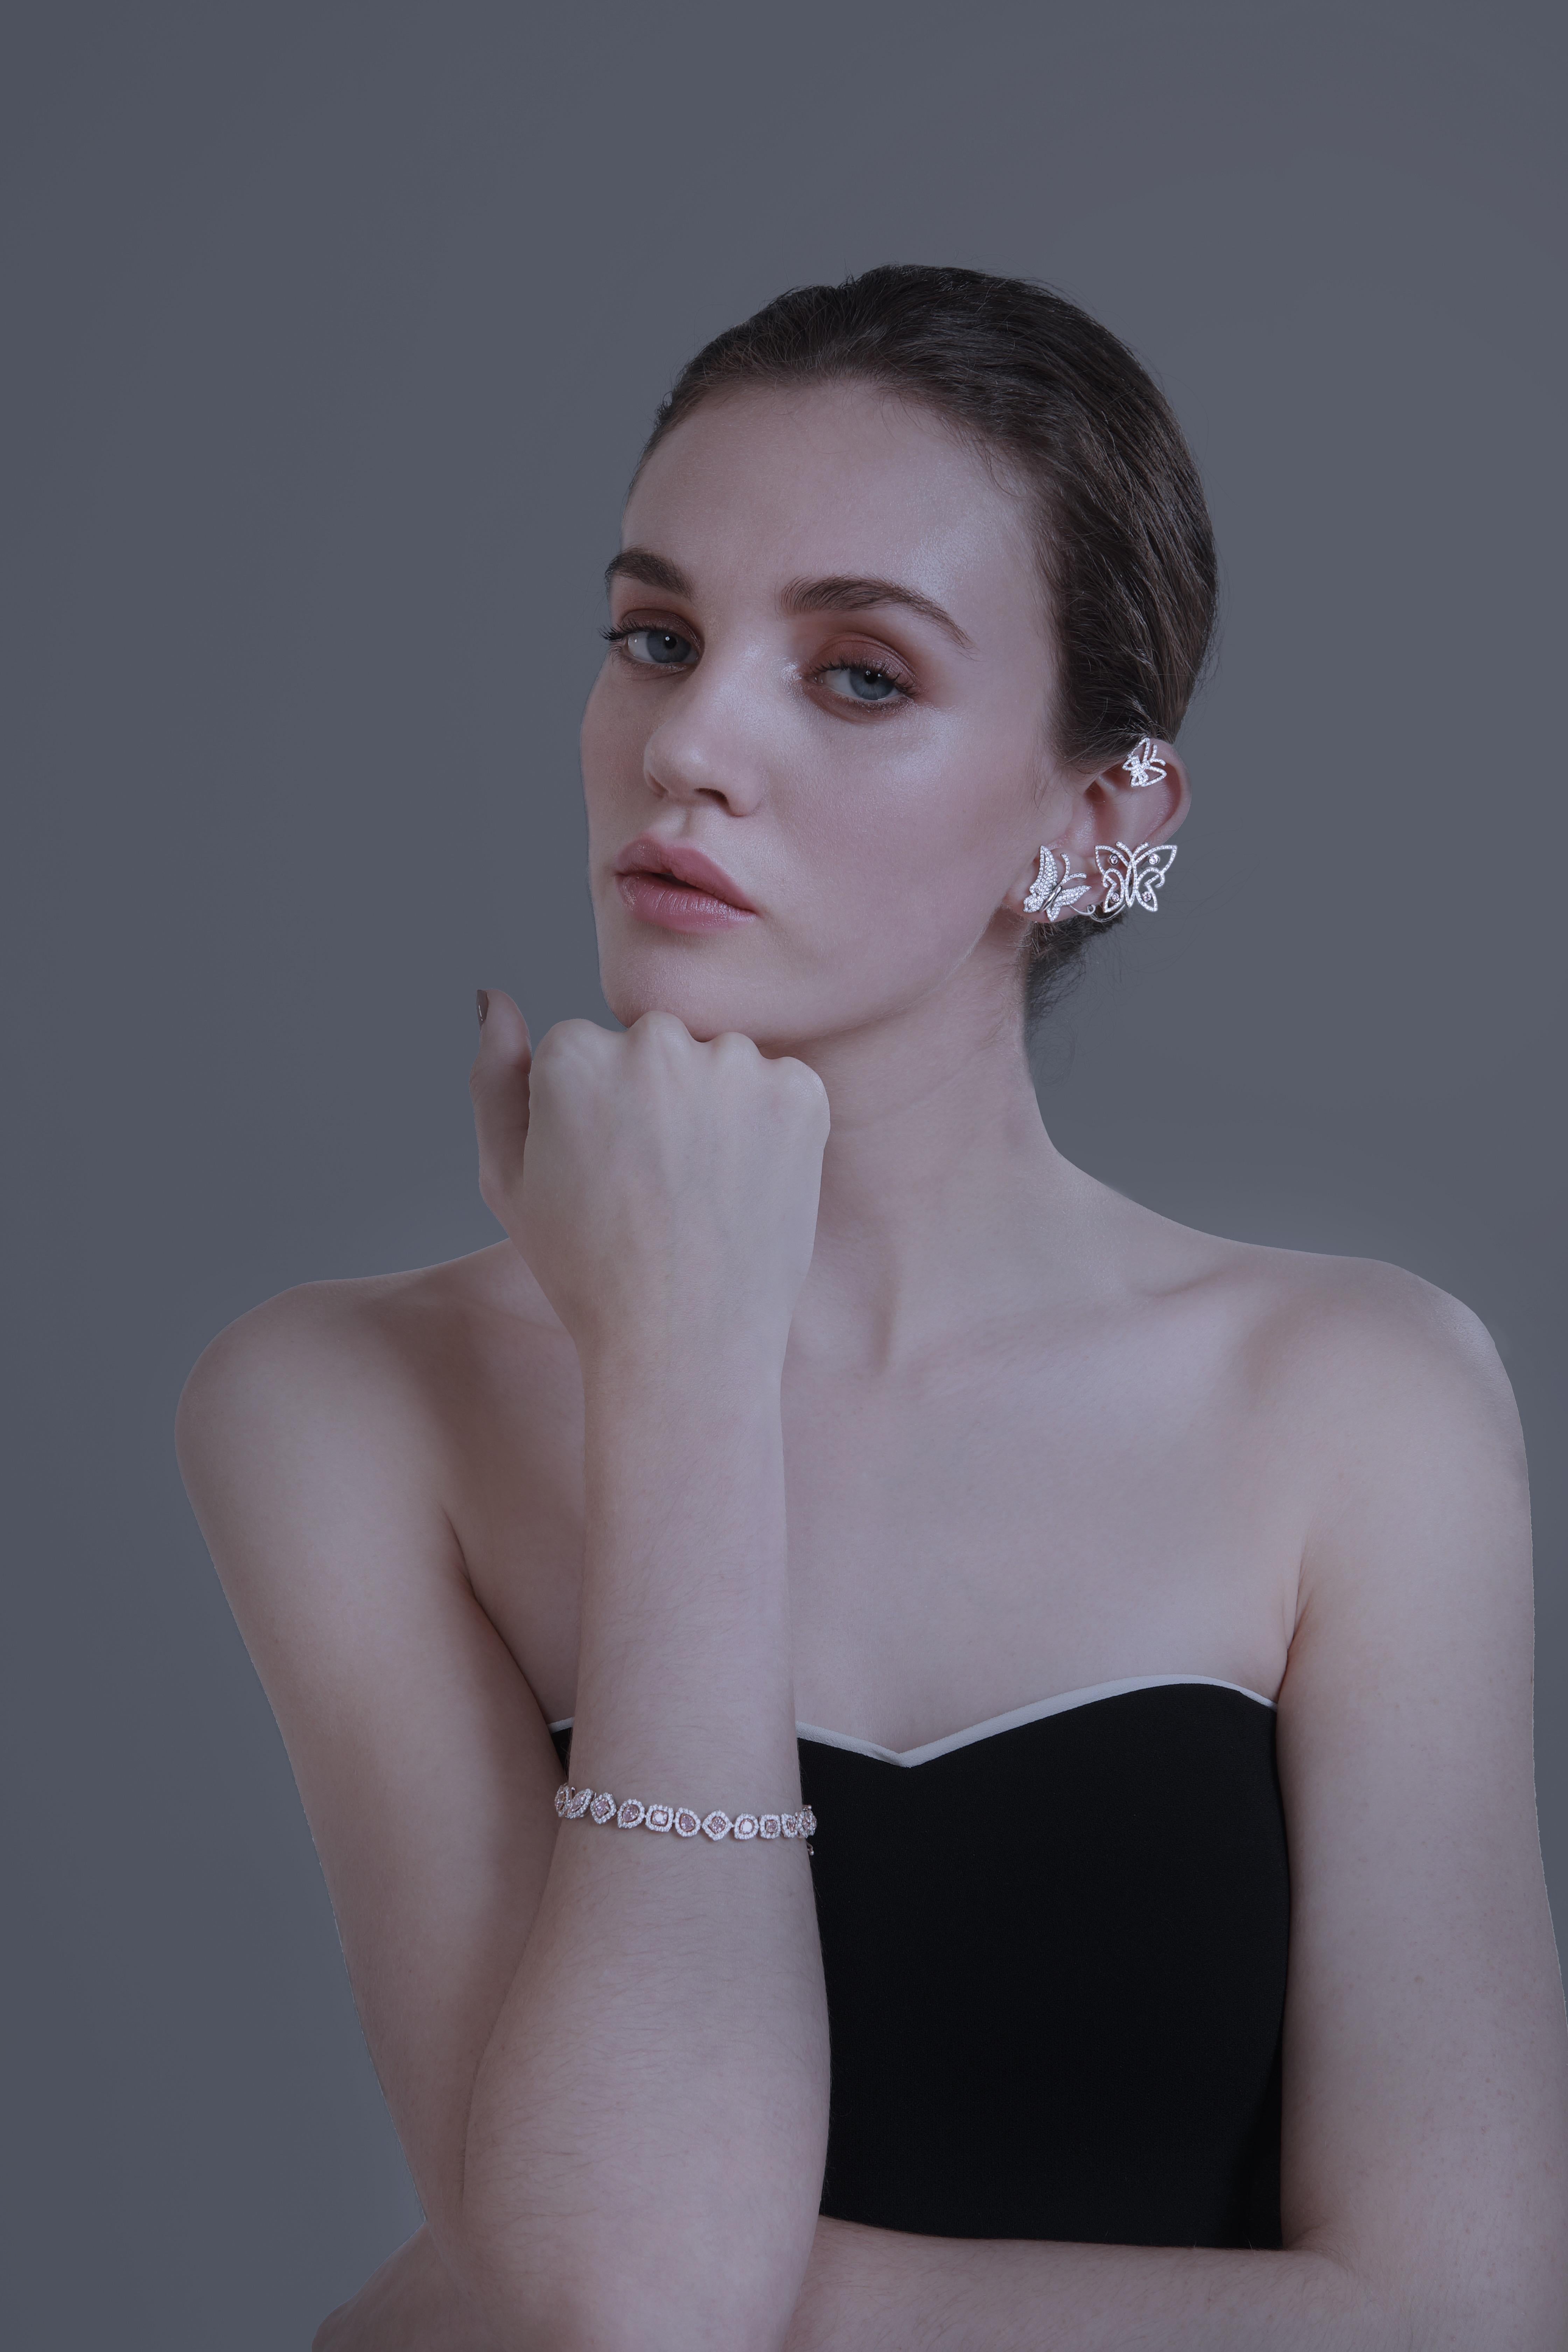 18k White Gold Ear Cuff.

4 Natural Fancy Purplish Pink Round Brilliant Diamonds, Carat Weight: 0.20ct
Over 290 White Diamonds, Carat Weight: 1.73ct

This piece really evokes the delicate and gentle nature of butterflies. It is made to look like